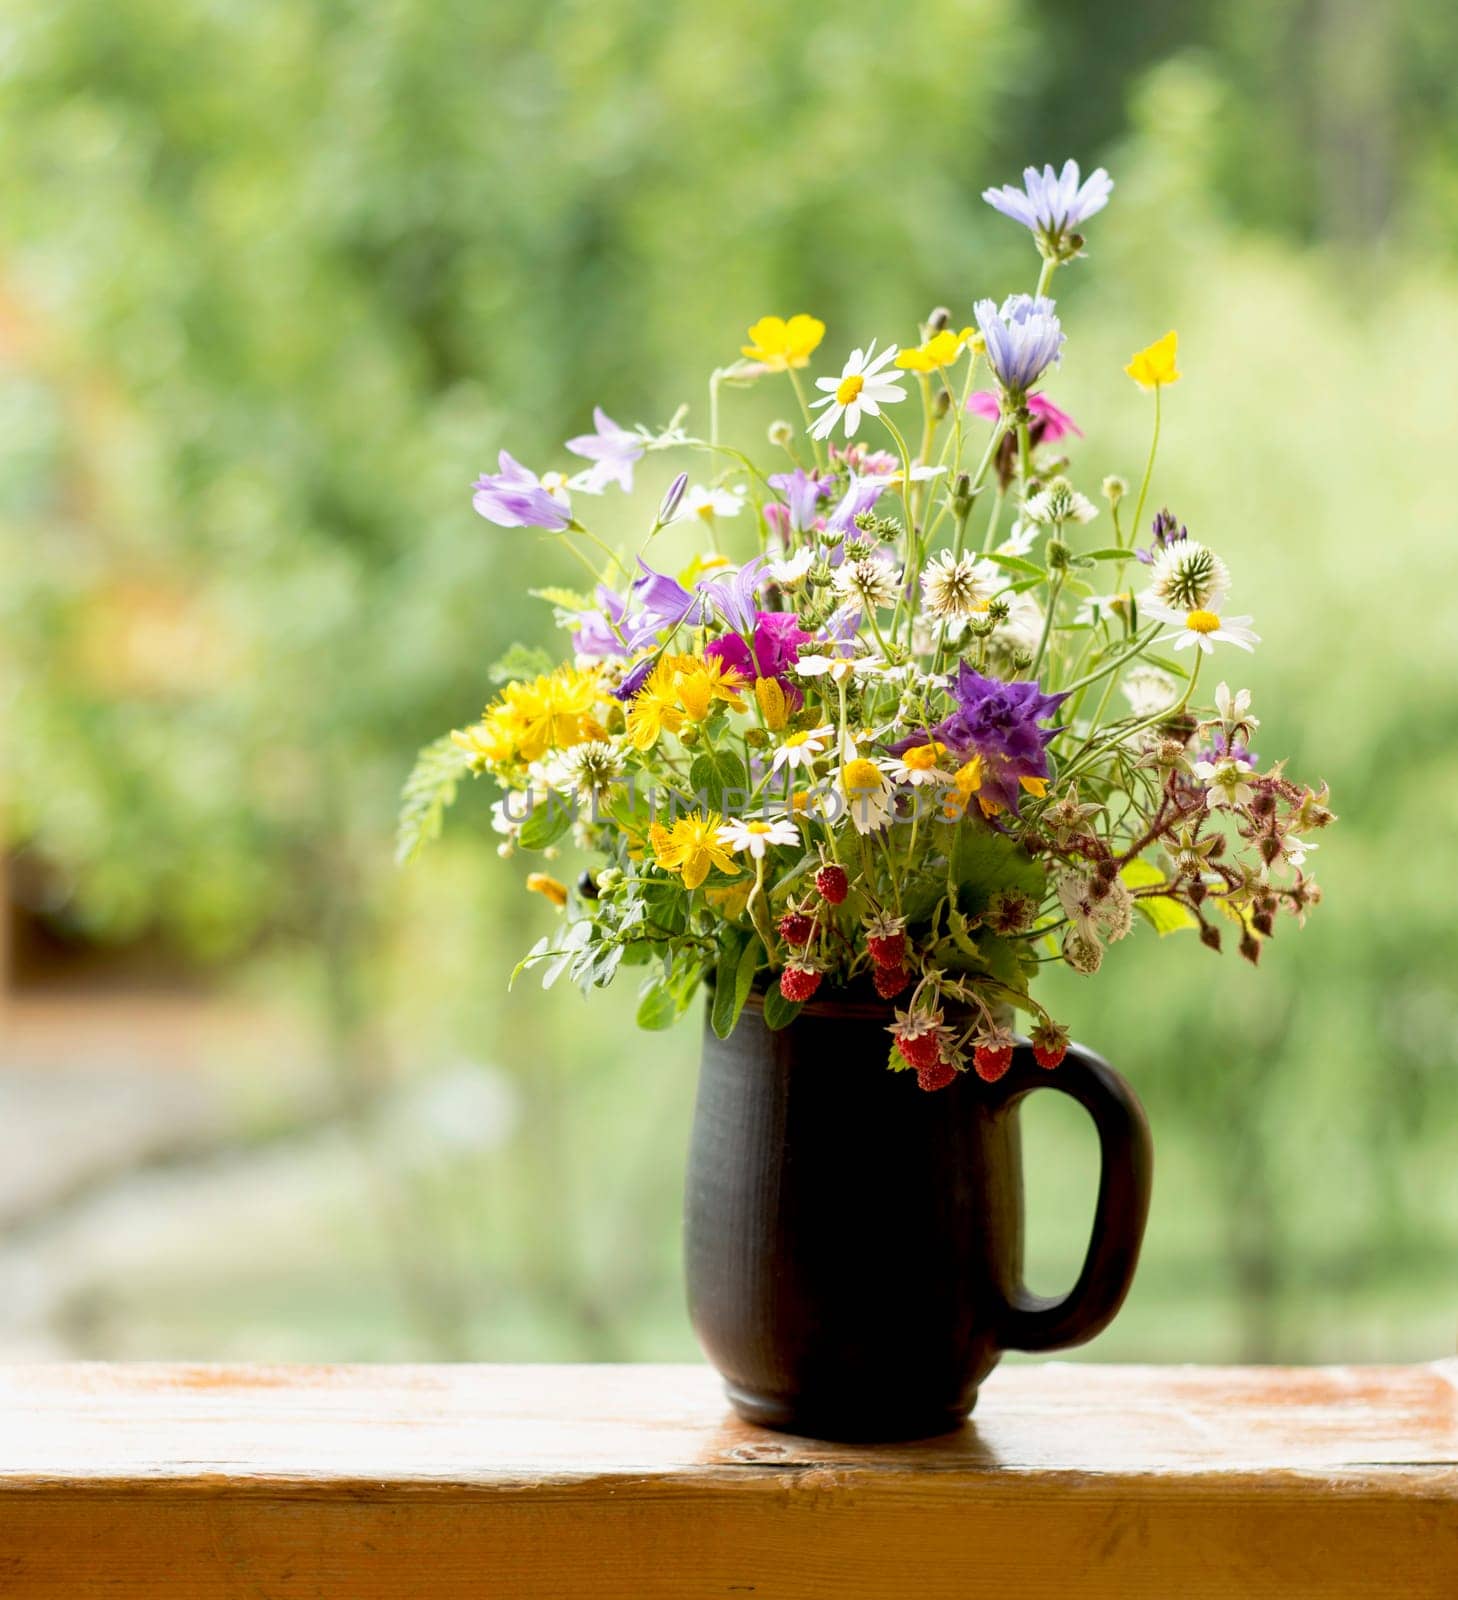 Medicinal plants. Summer beautiful bouquet of bright wildflowers with ripe strawberries on a wooden window sill by aprilphoto